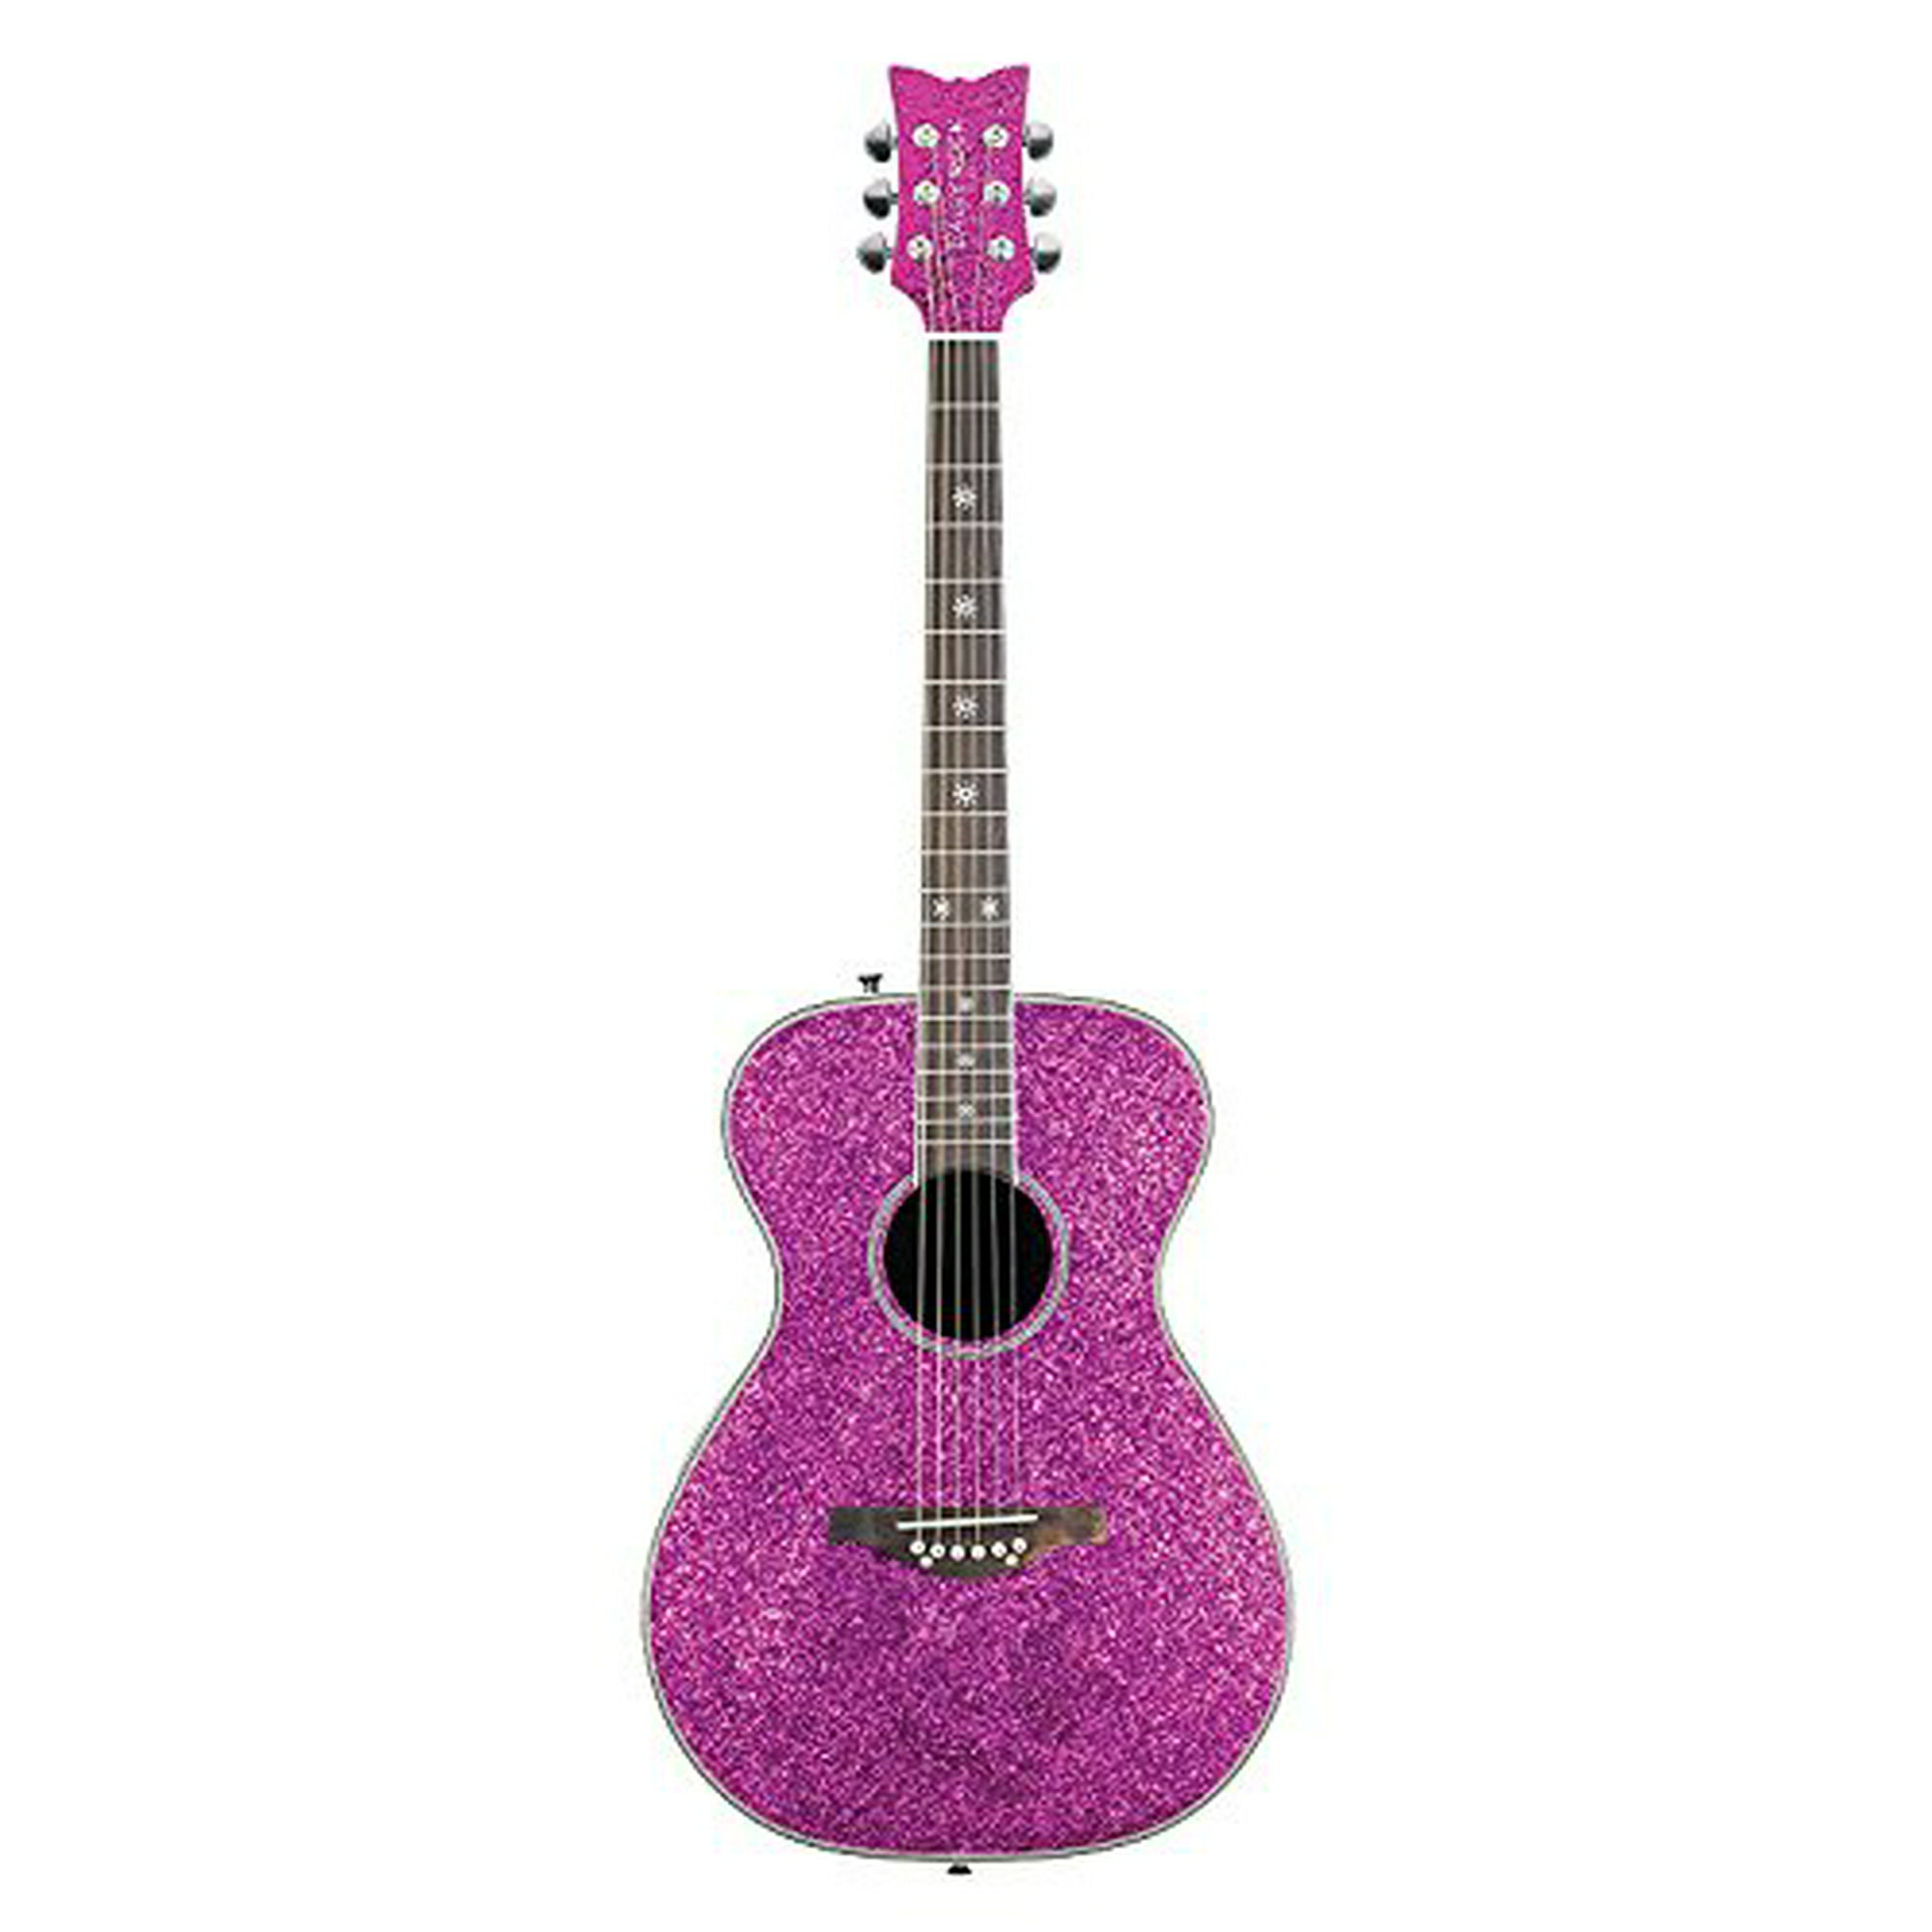 Daisy Rock 6 String Acoustic-Electric Guitar, Pink Sparkle (DR6225 ...